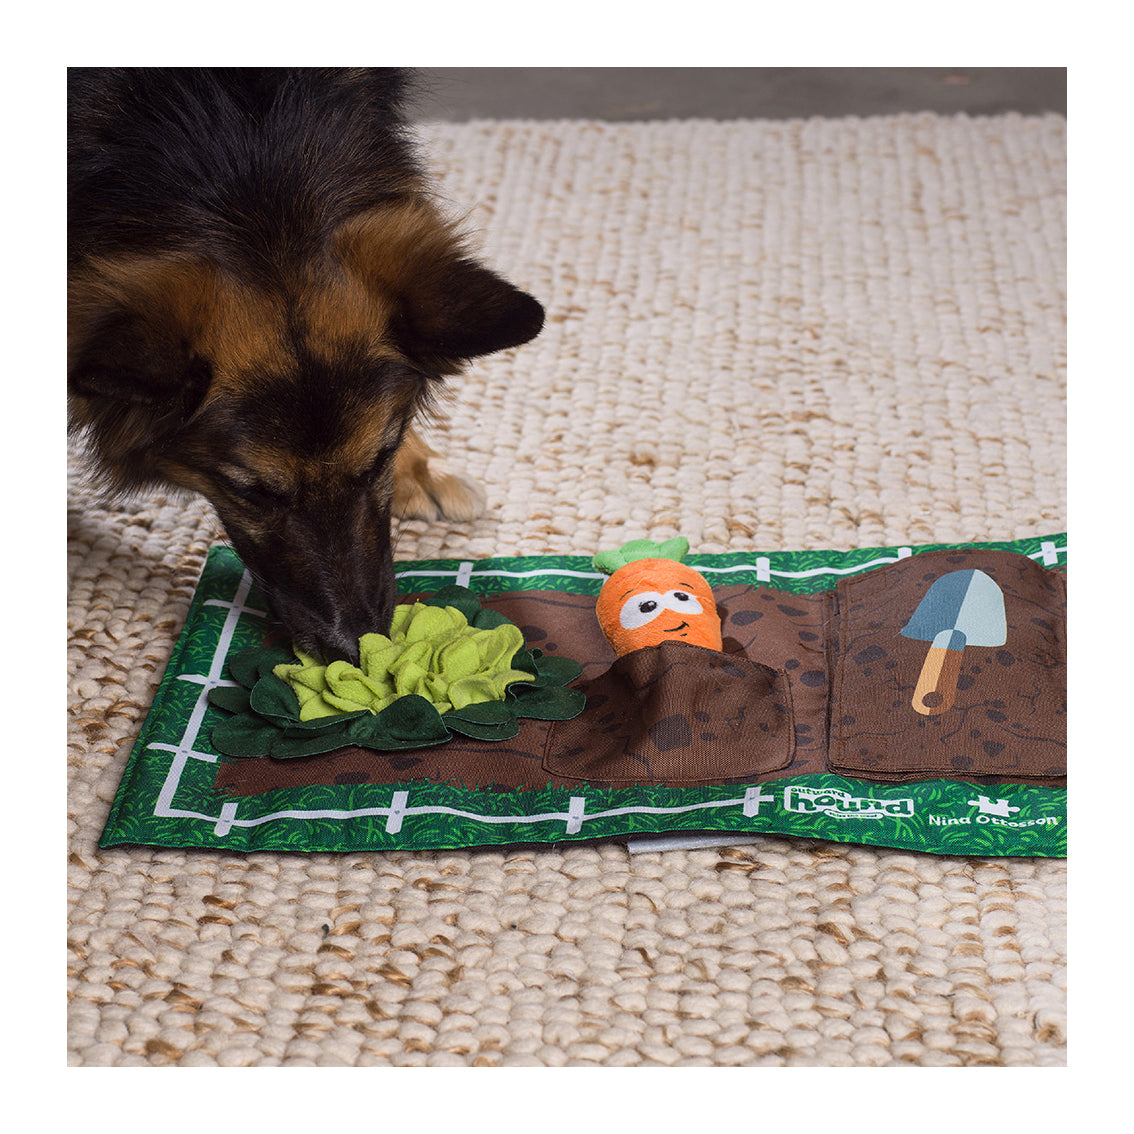 Sniffiz SmellyUFO Durable Interactive Treat Dispensing Puzzle / Enrichment Toy for Dogs - Mind Stimulating Food Game / Slow Feeder / Wobble Toy - from